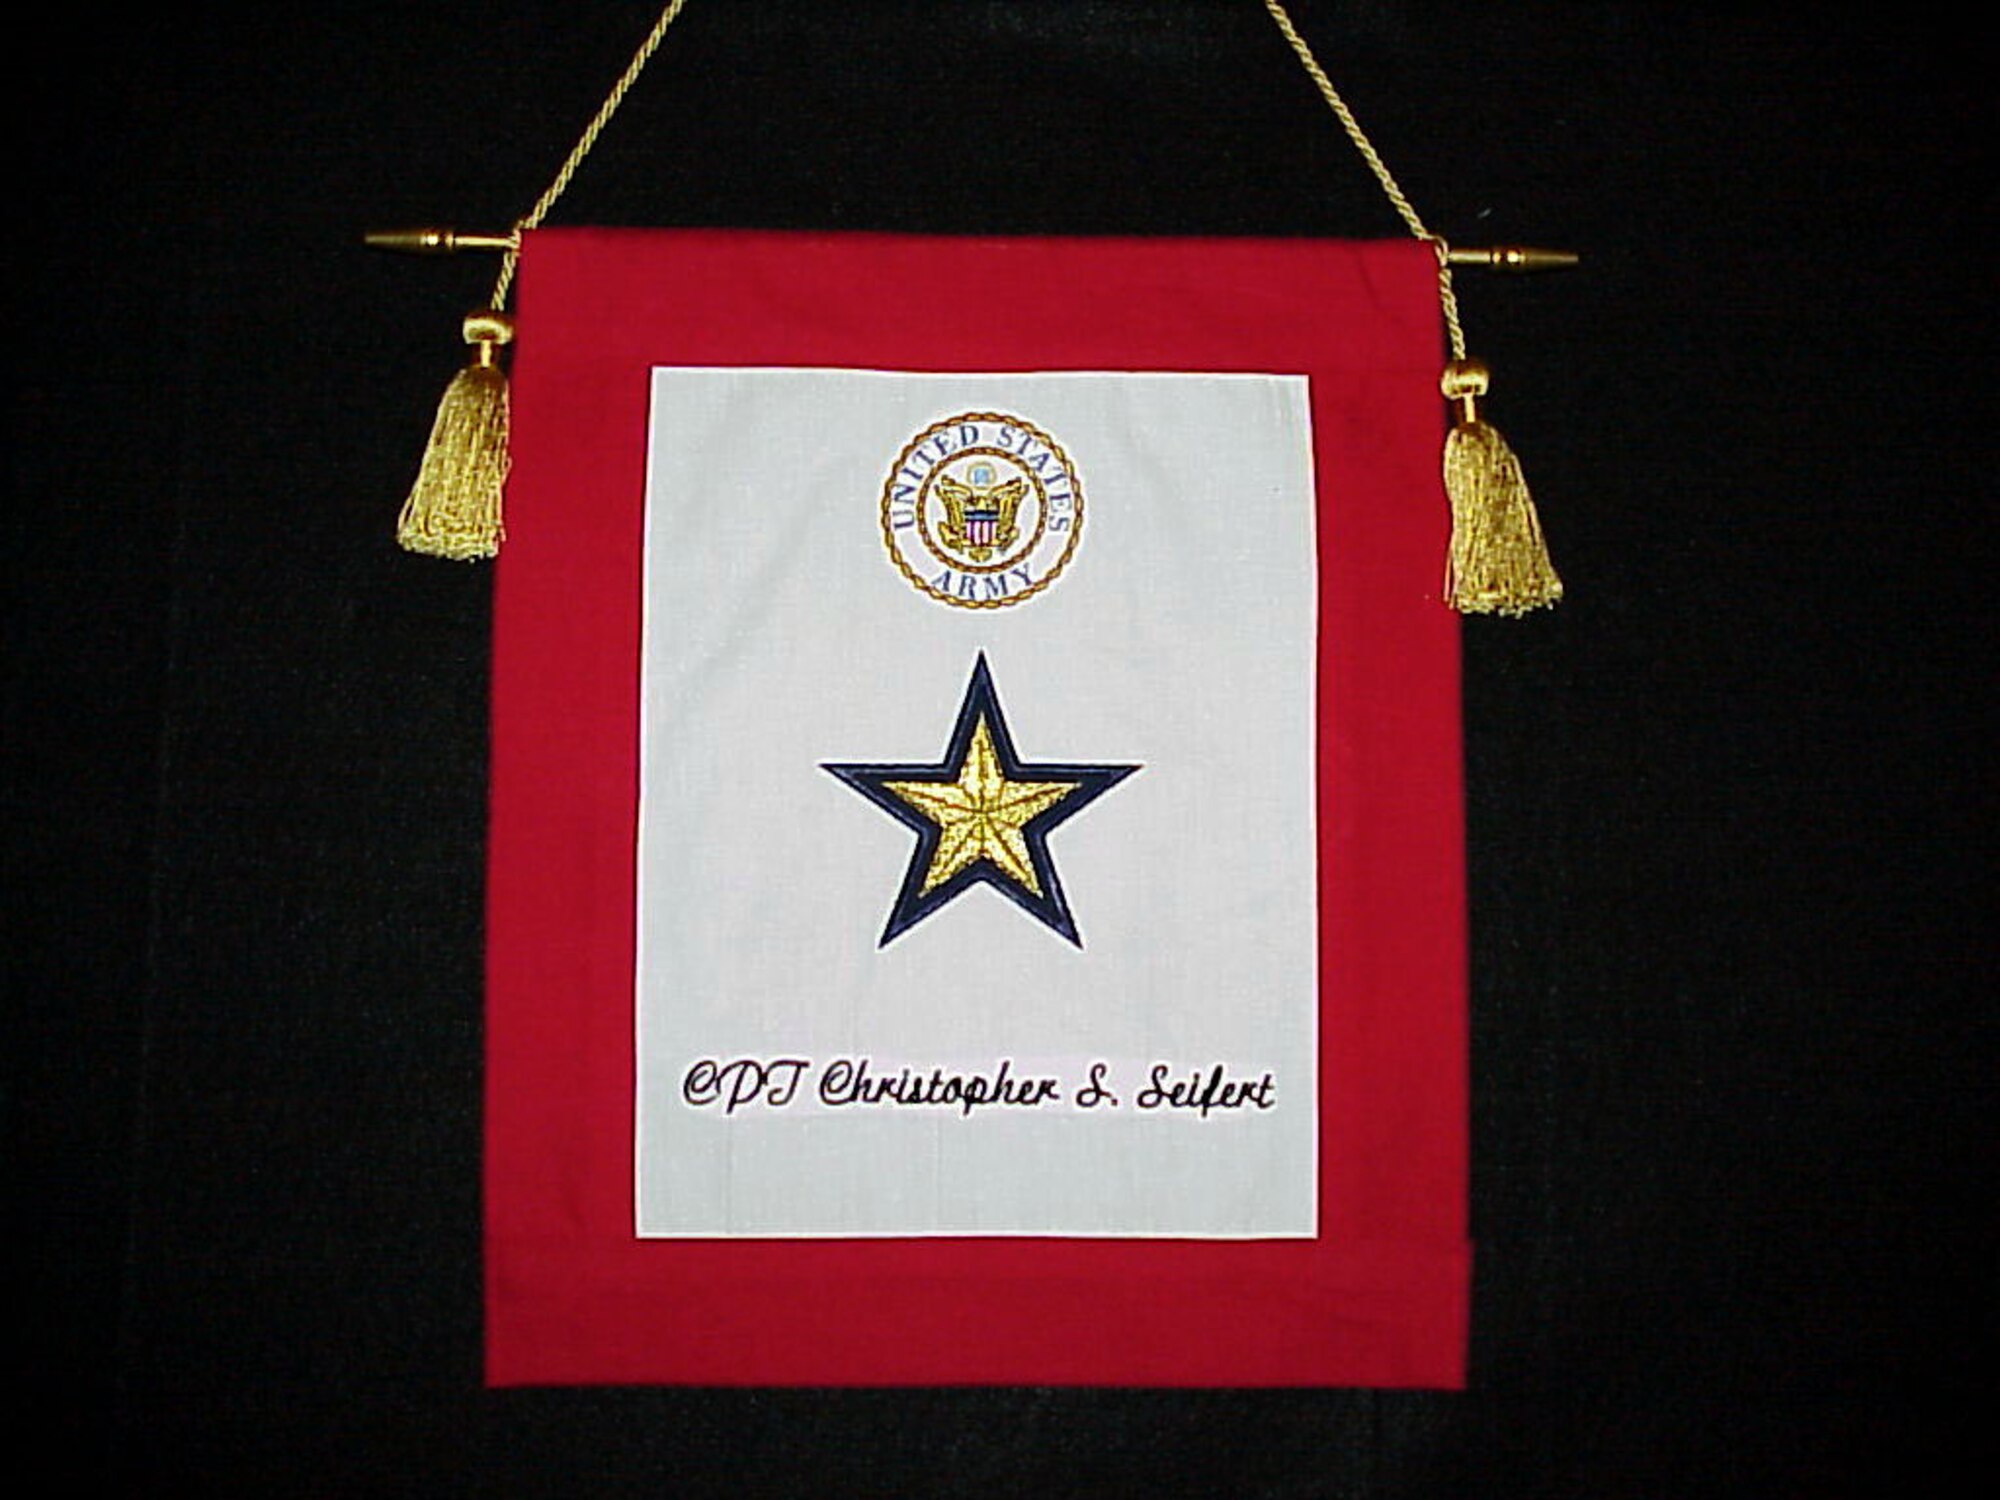 ABERDEEN PROVING GROUND, Md. (AFPN) -- Two Air Force spouses are helping revive an old tradition to honor the families of servicemembers killed in battle with "gold star service flags."  The gold star flag is a variation on the blue star service flag that made its first appearance nearly a century ago.  (Courtesy photo)

